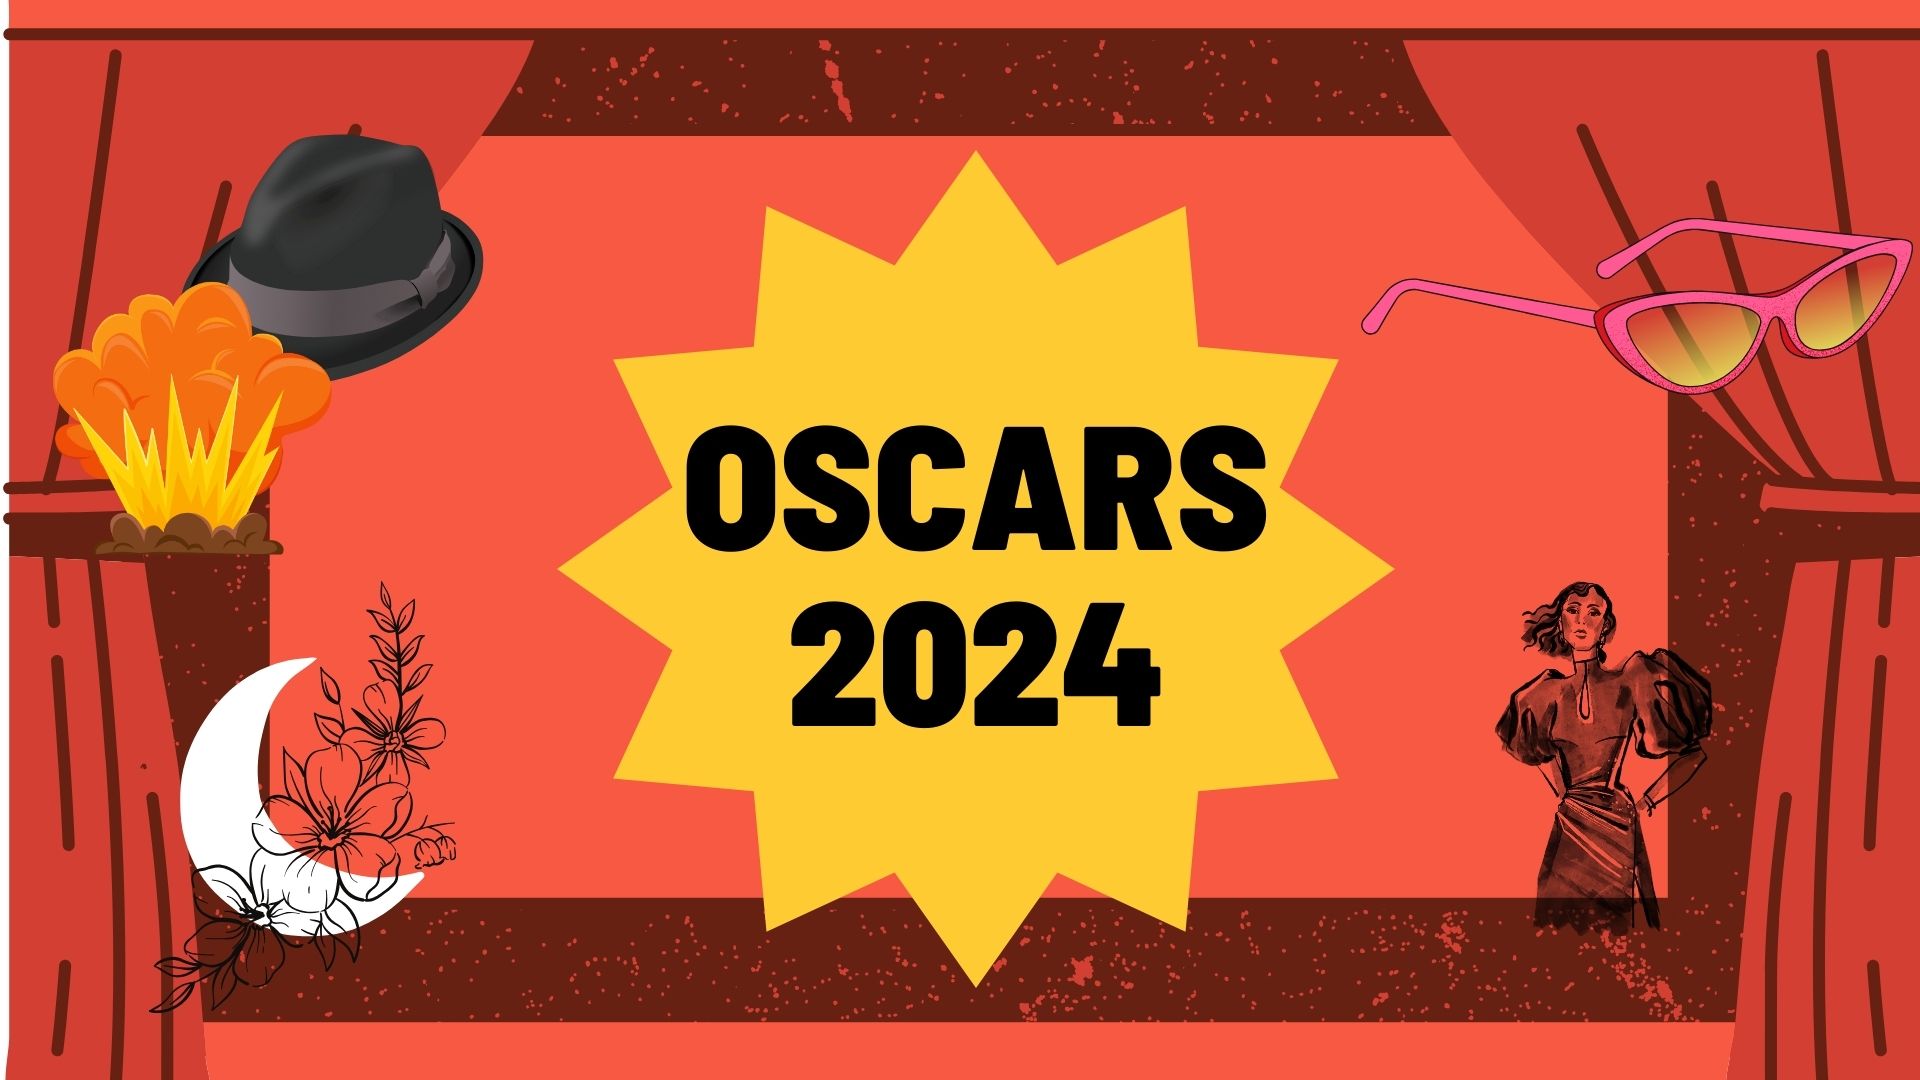 Movie fans are excited for the possibility to hear their favorite movie announced at the Oscars.